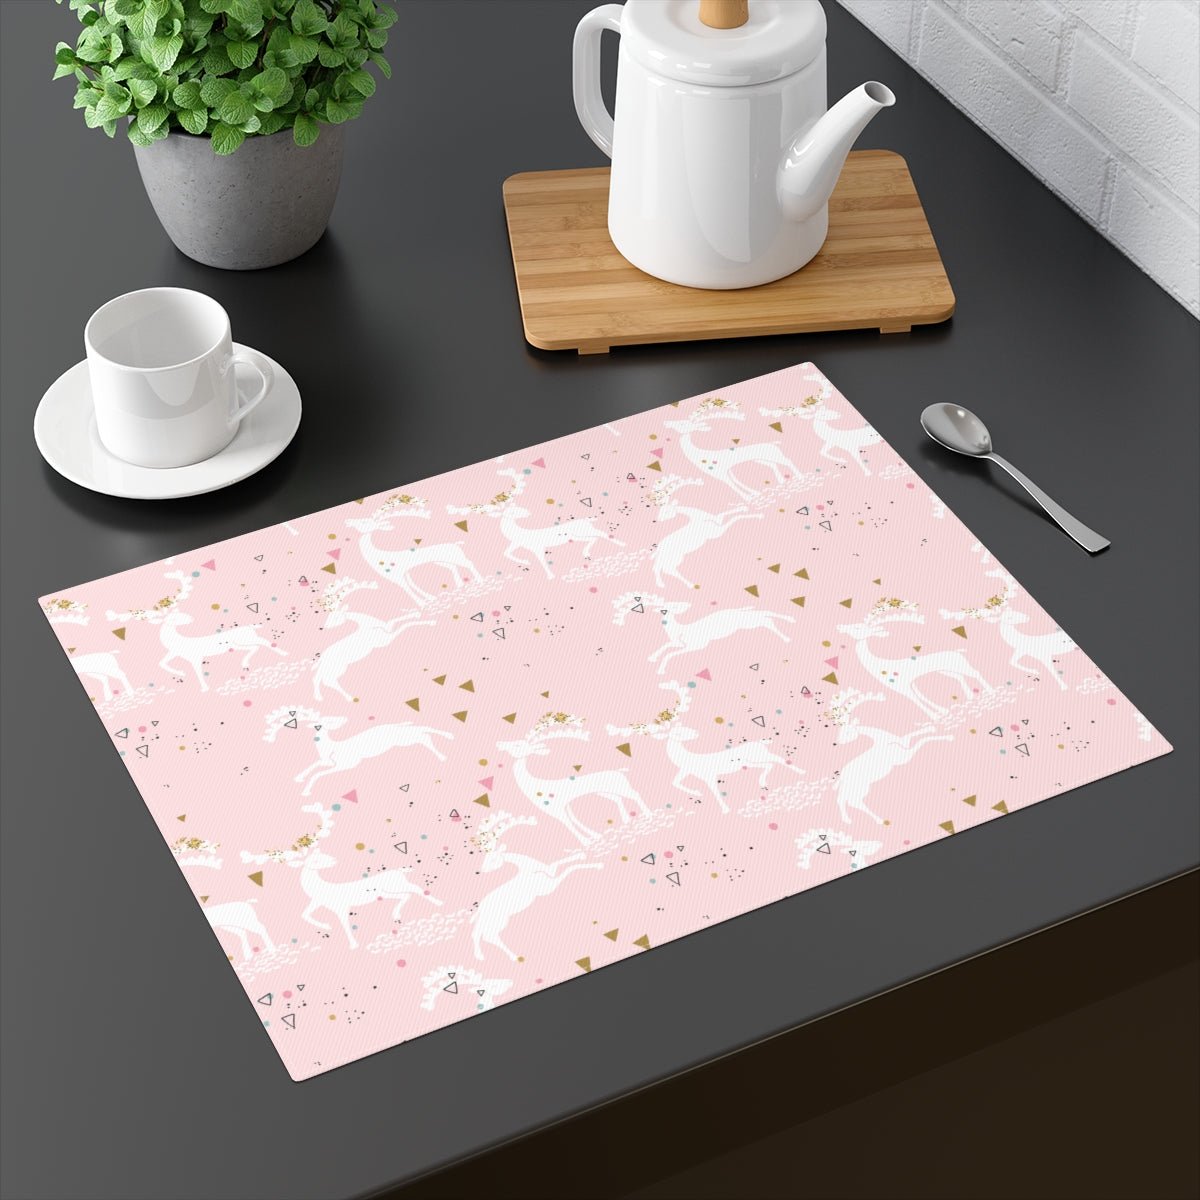 Magical Reindeers Placemat - Puffin Lime